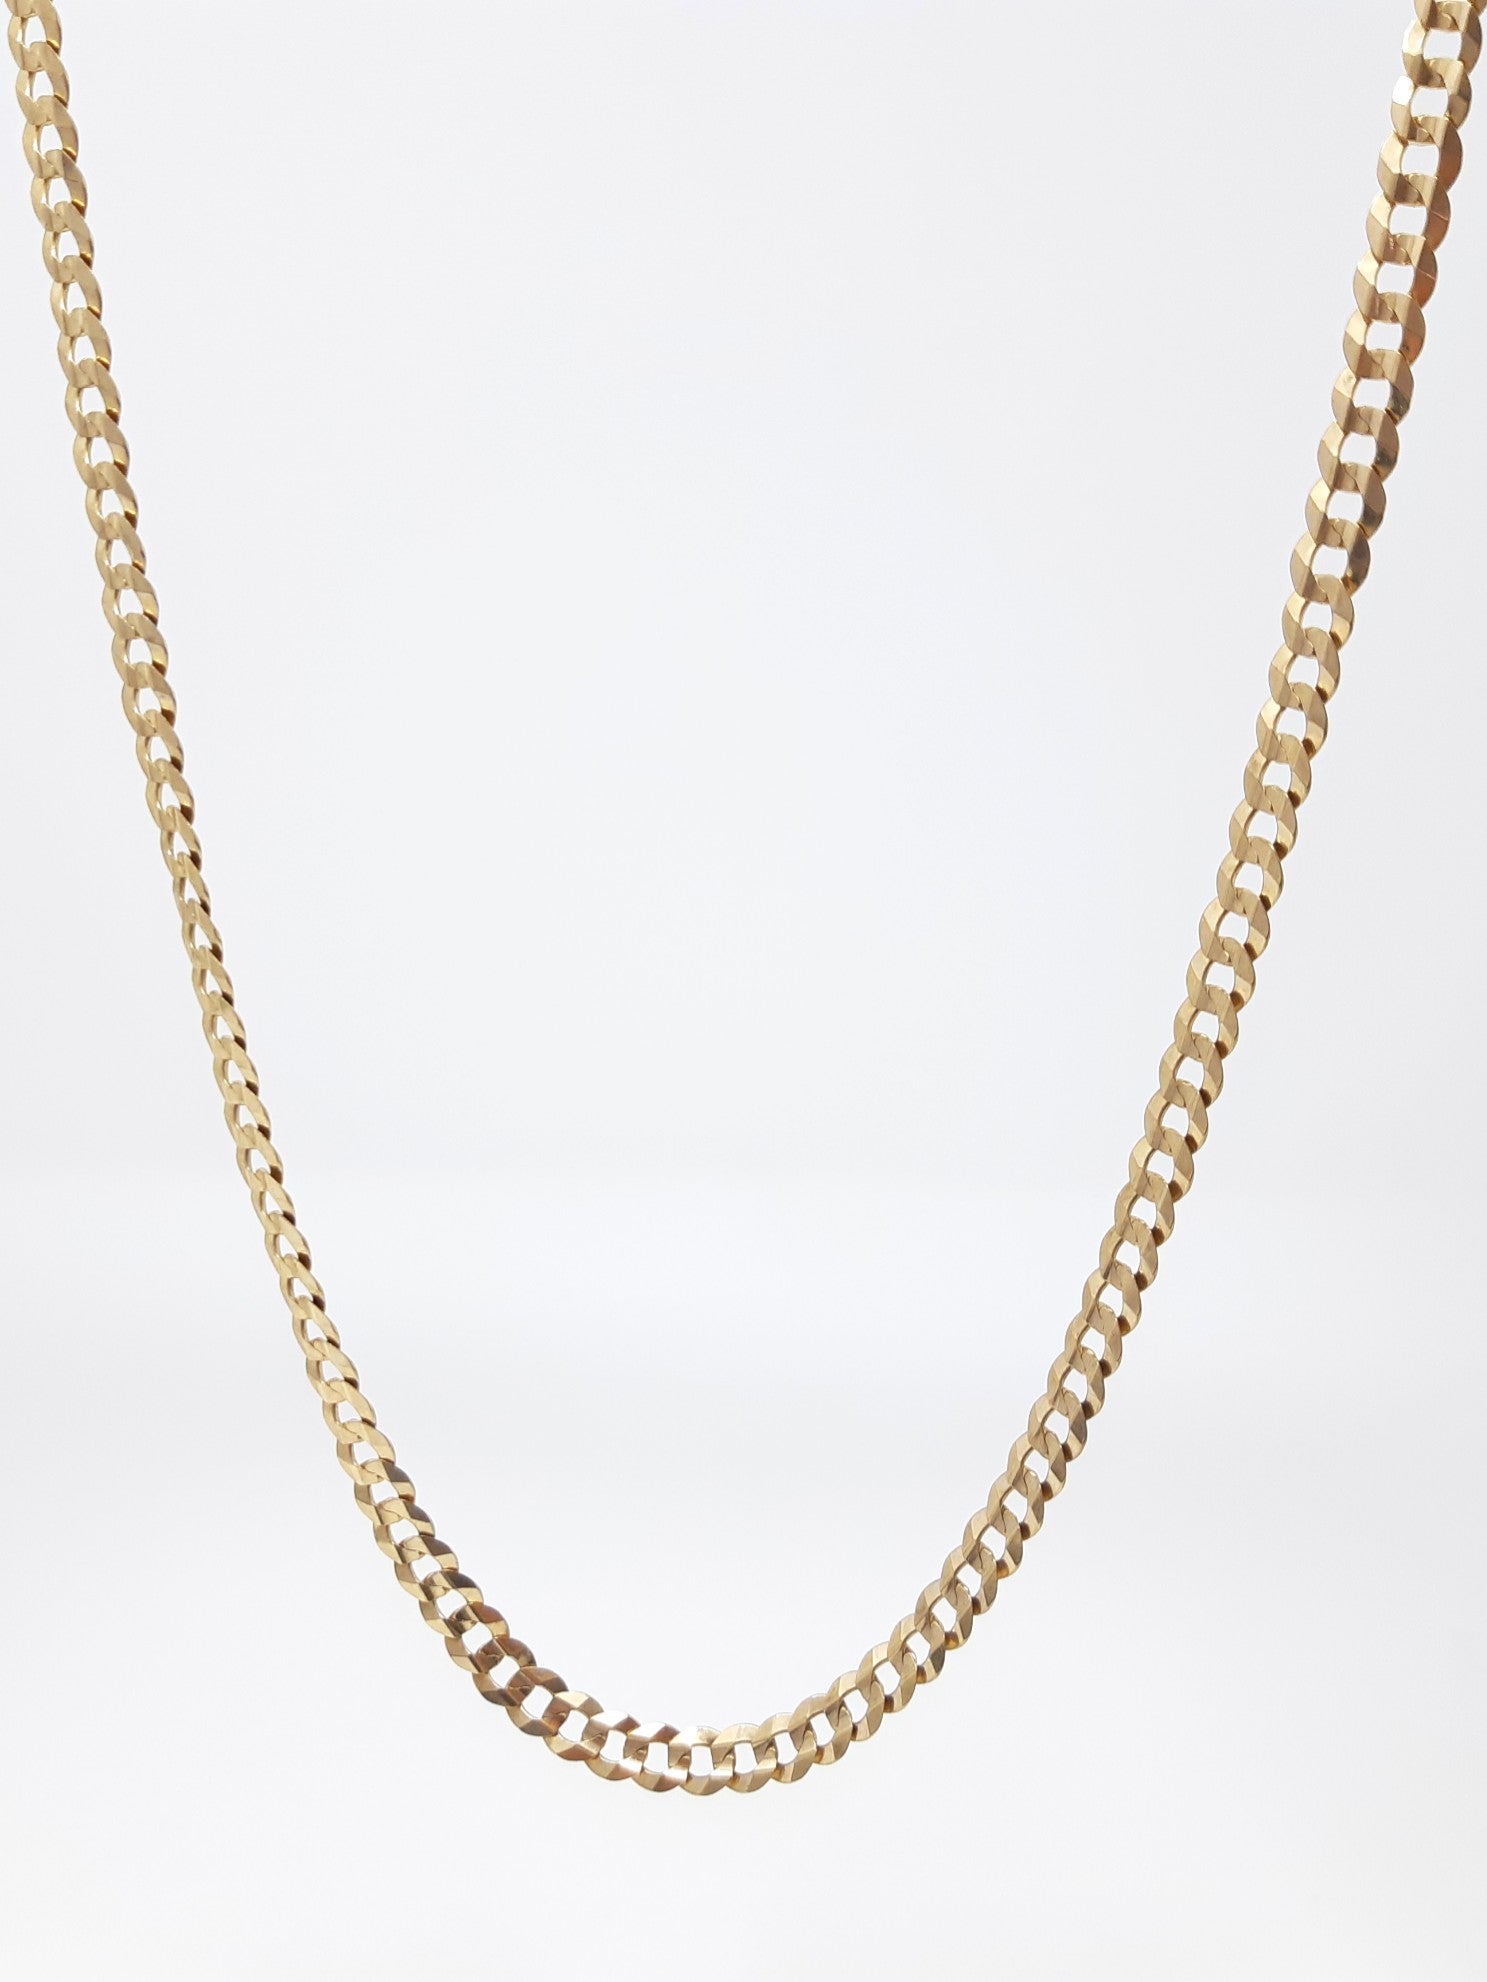 10K Yellow Gold Comfort Curb Chain Necklace, 3.6mm, 20